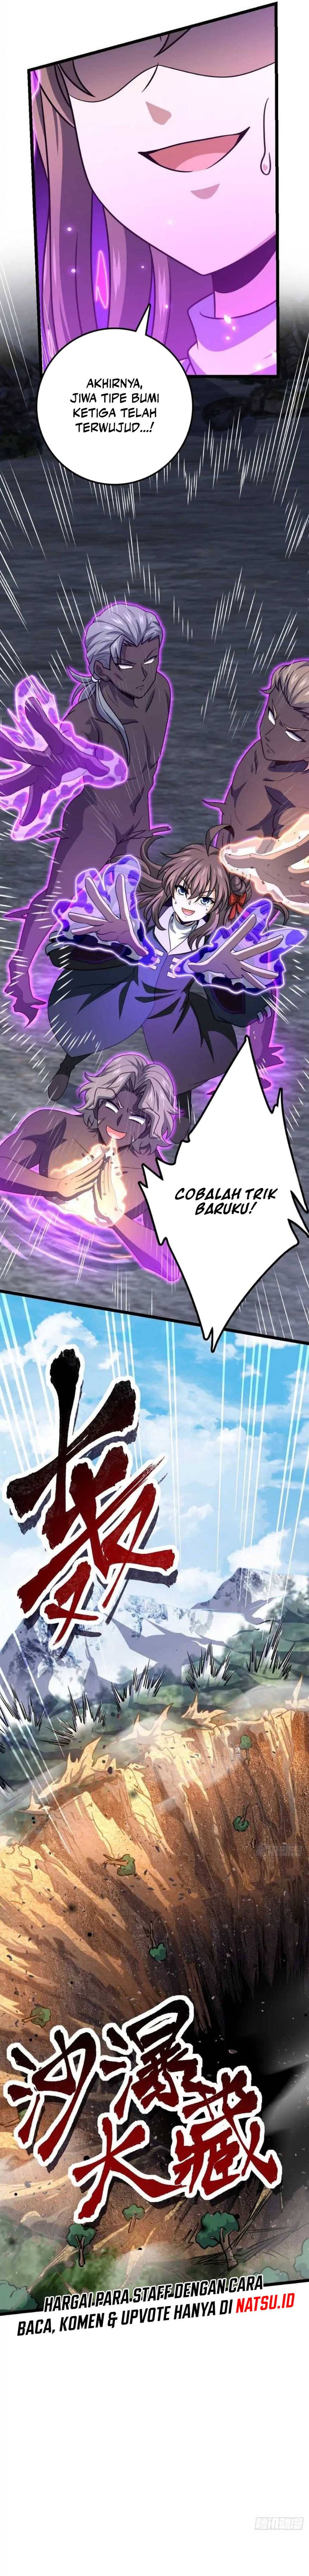 Spare Me, Great Lord! Chapter 474